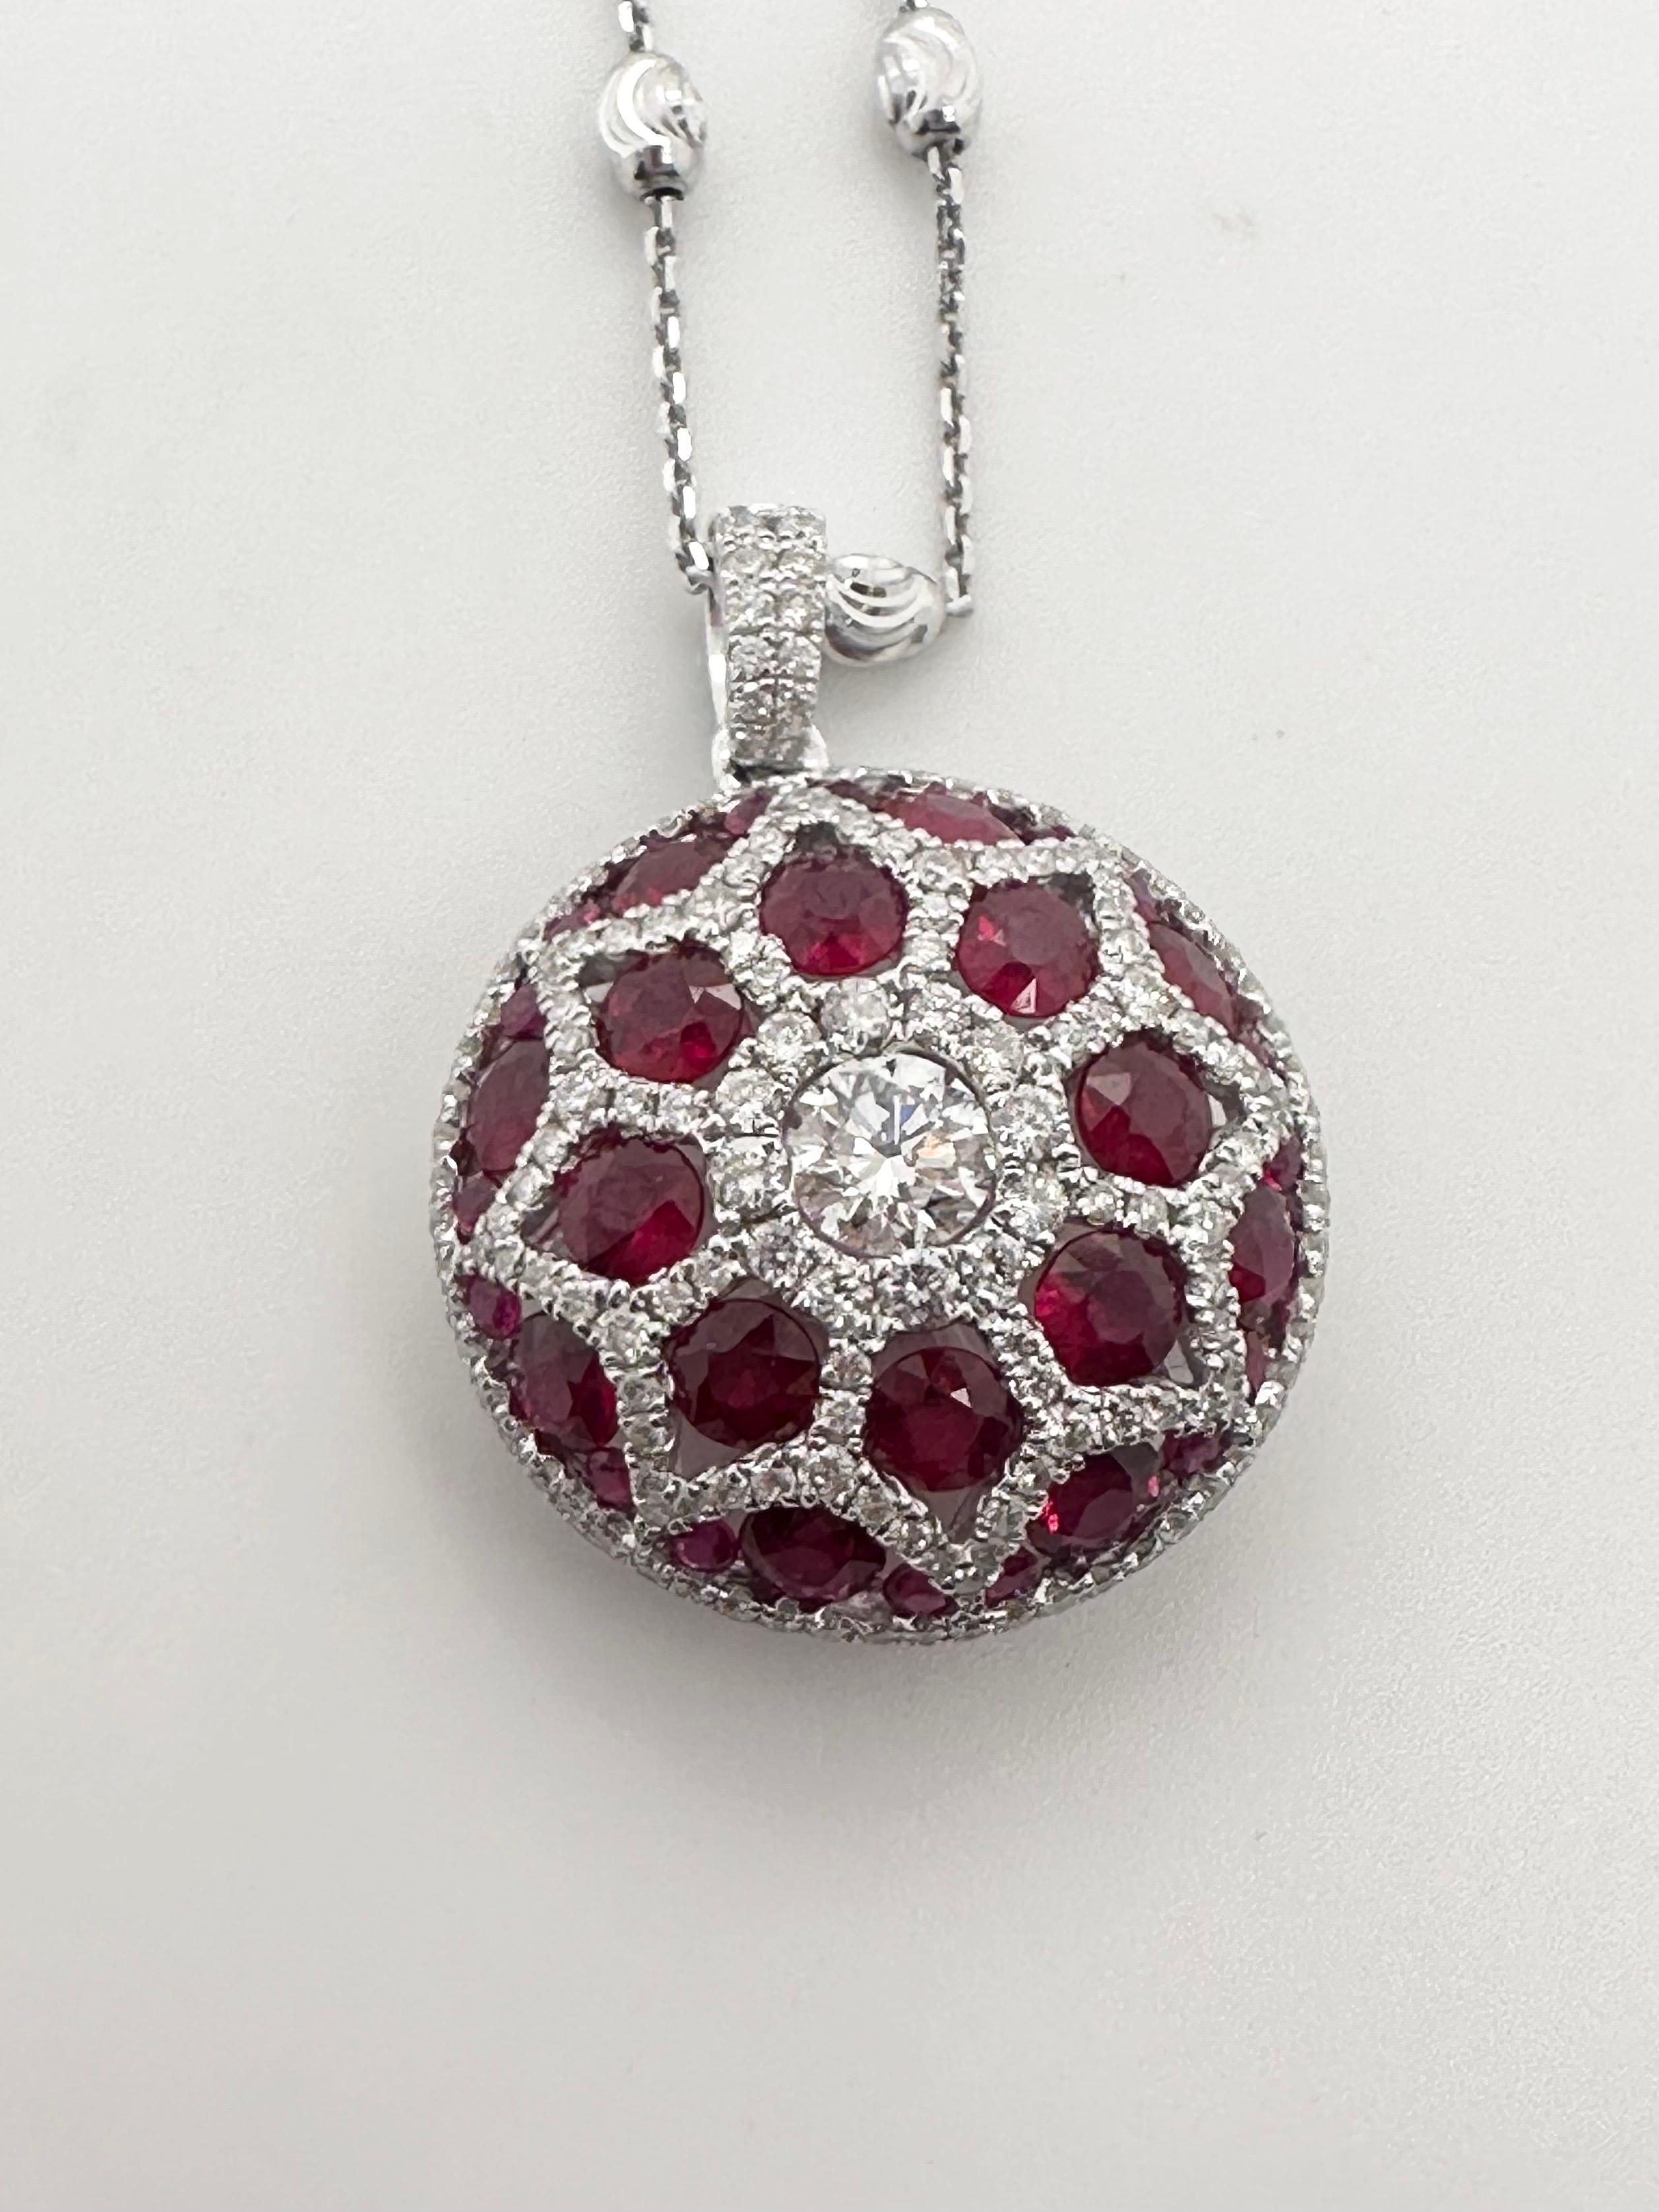 Elegant ruby and diamond pendant necklace, 100% natural untreated rubies(Burma) paired with fine VS diamonds in 18KT white gold.

Certificate of authenticity comes with purchase

ABOUT US
We are a family-owned business. Our studio in located in the